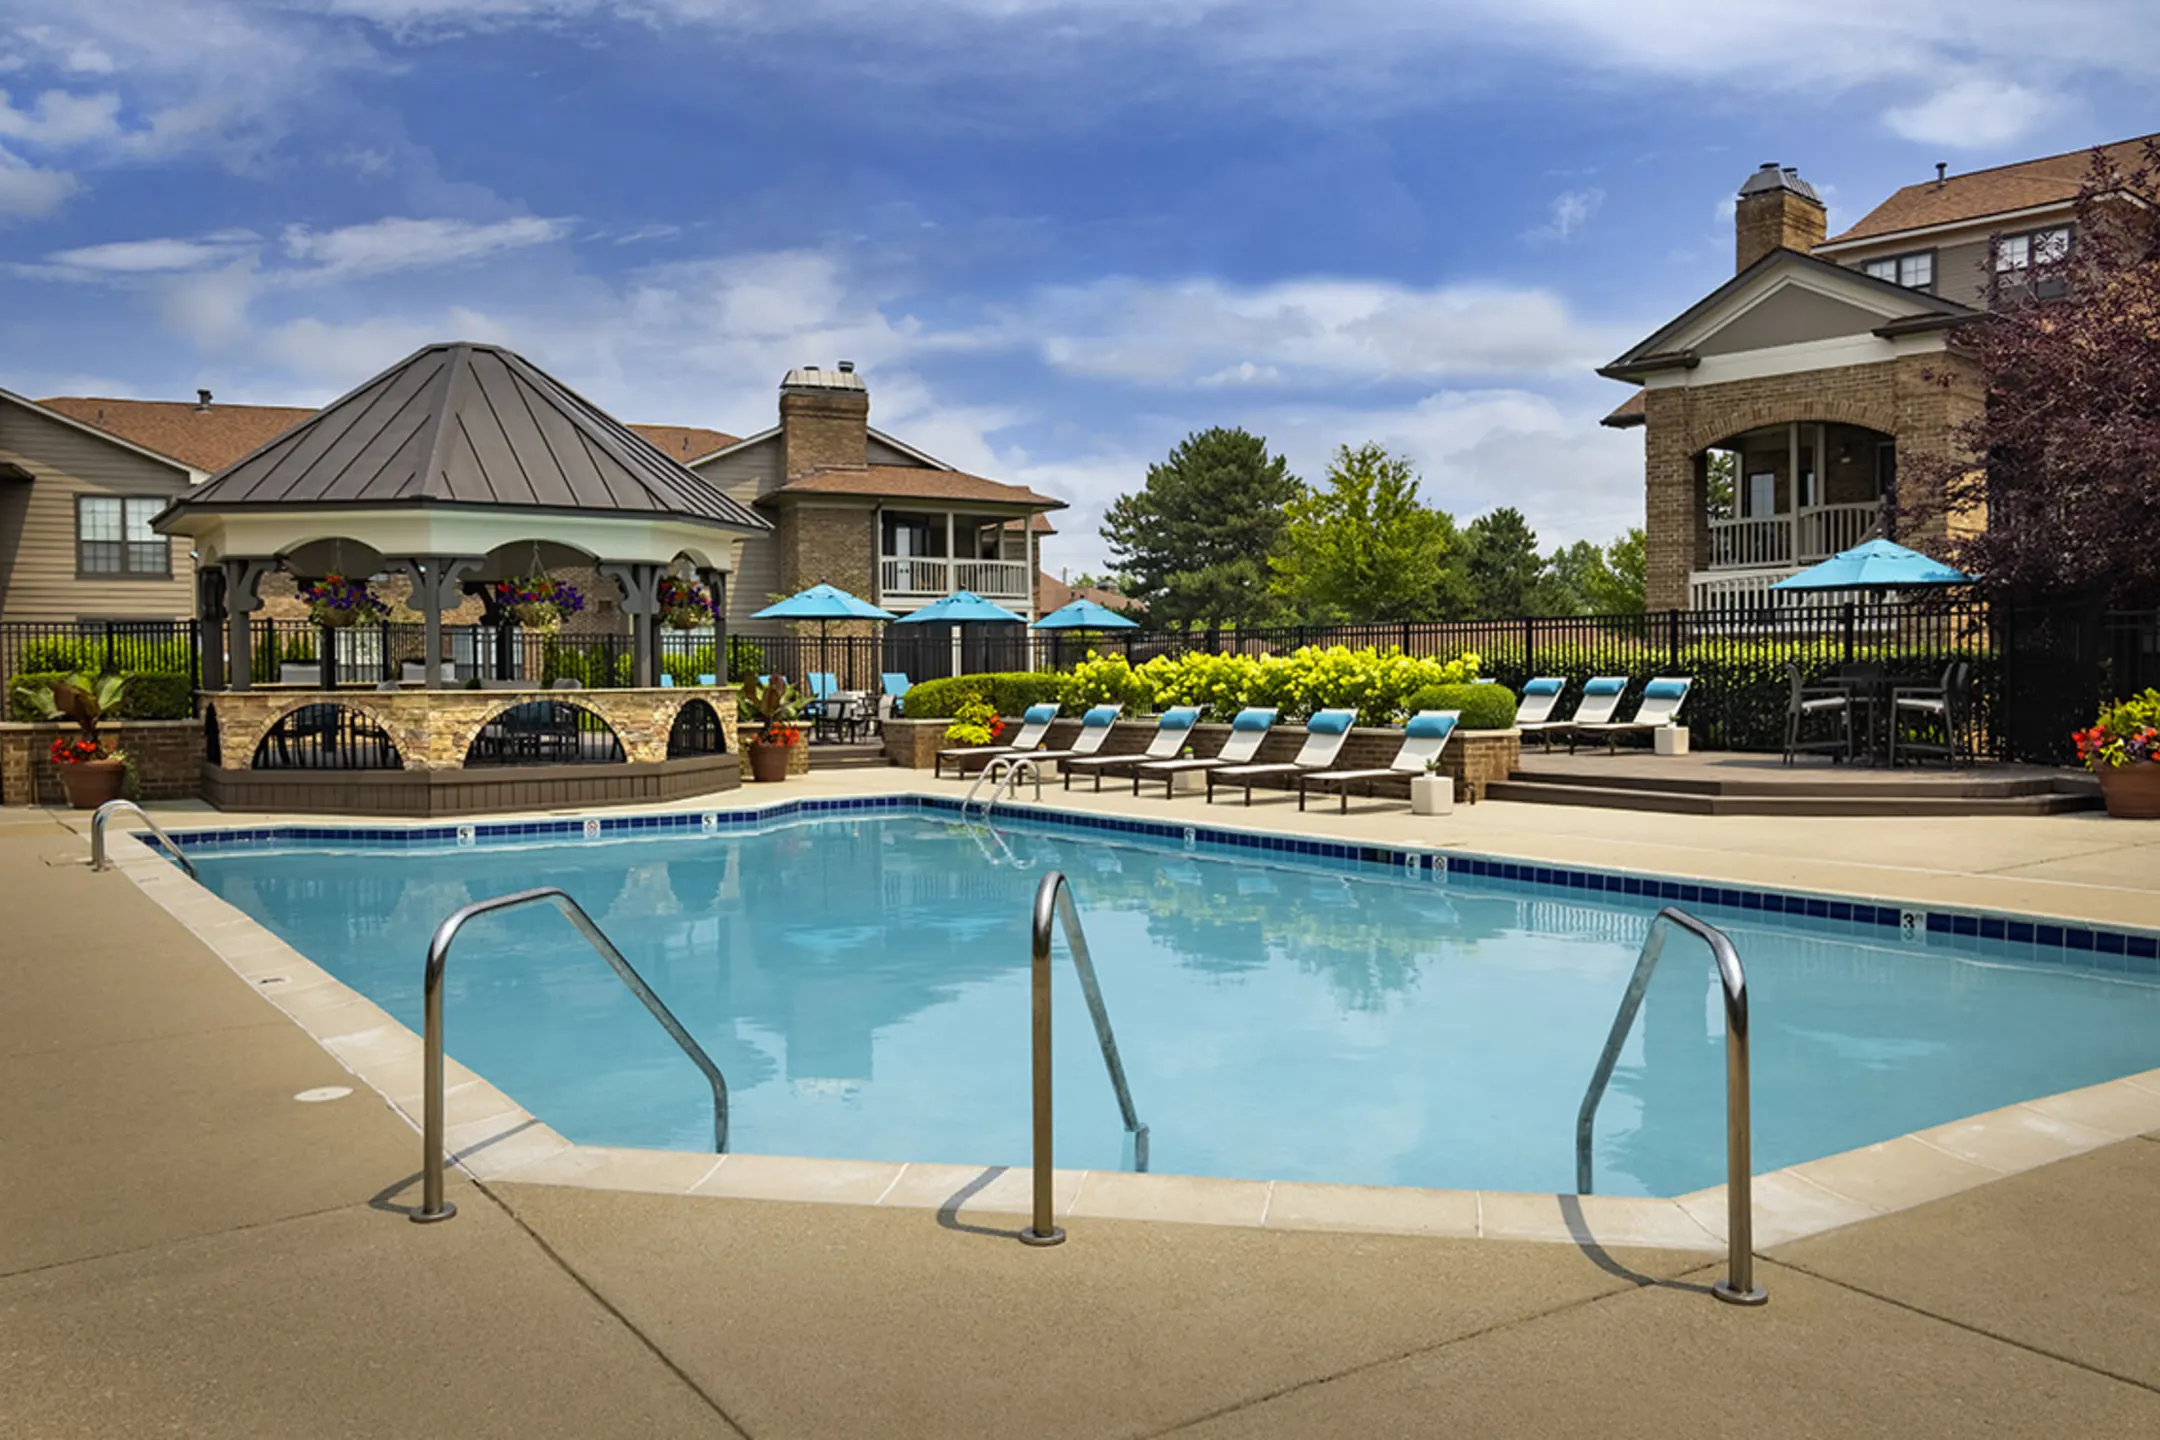 Pool - Willow Lake Apartments - Indianapolis, IN